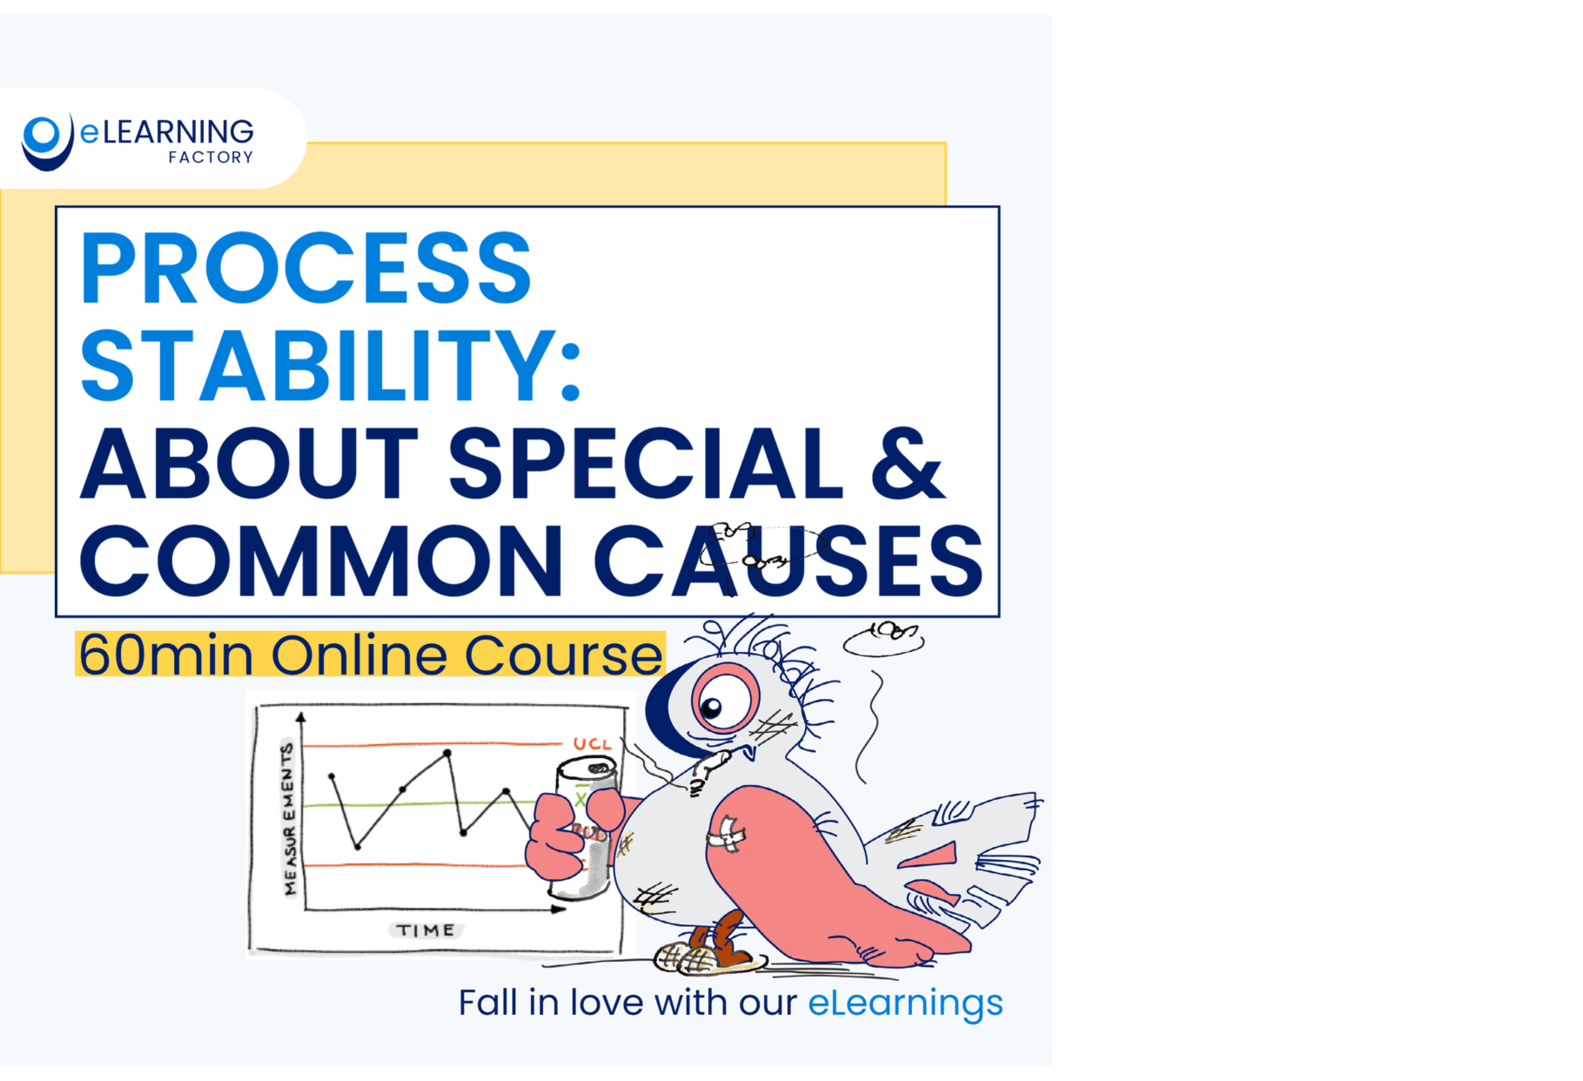 Process Stability, Process Variation, Special & Common Cause. Explained intuitively. 20 years experience in applied statistics. 